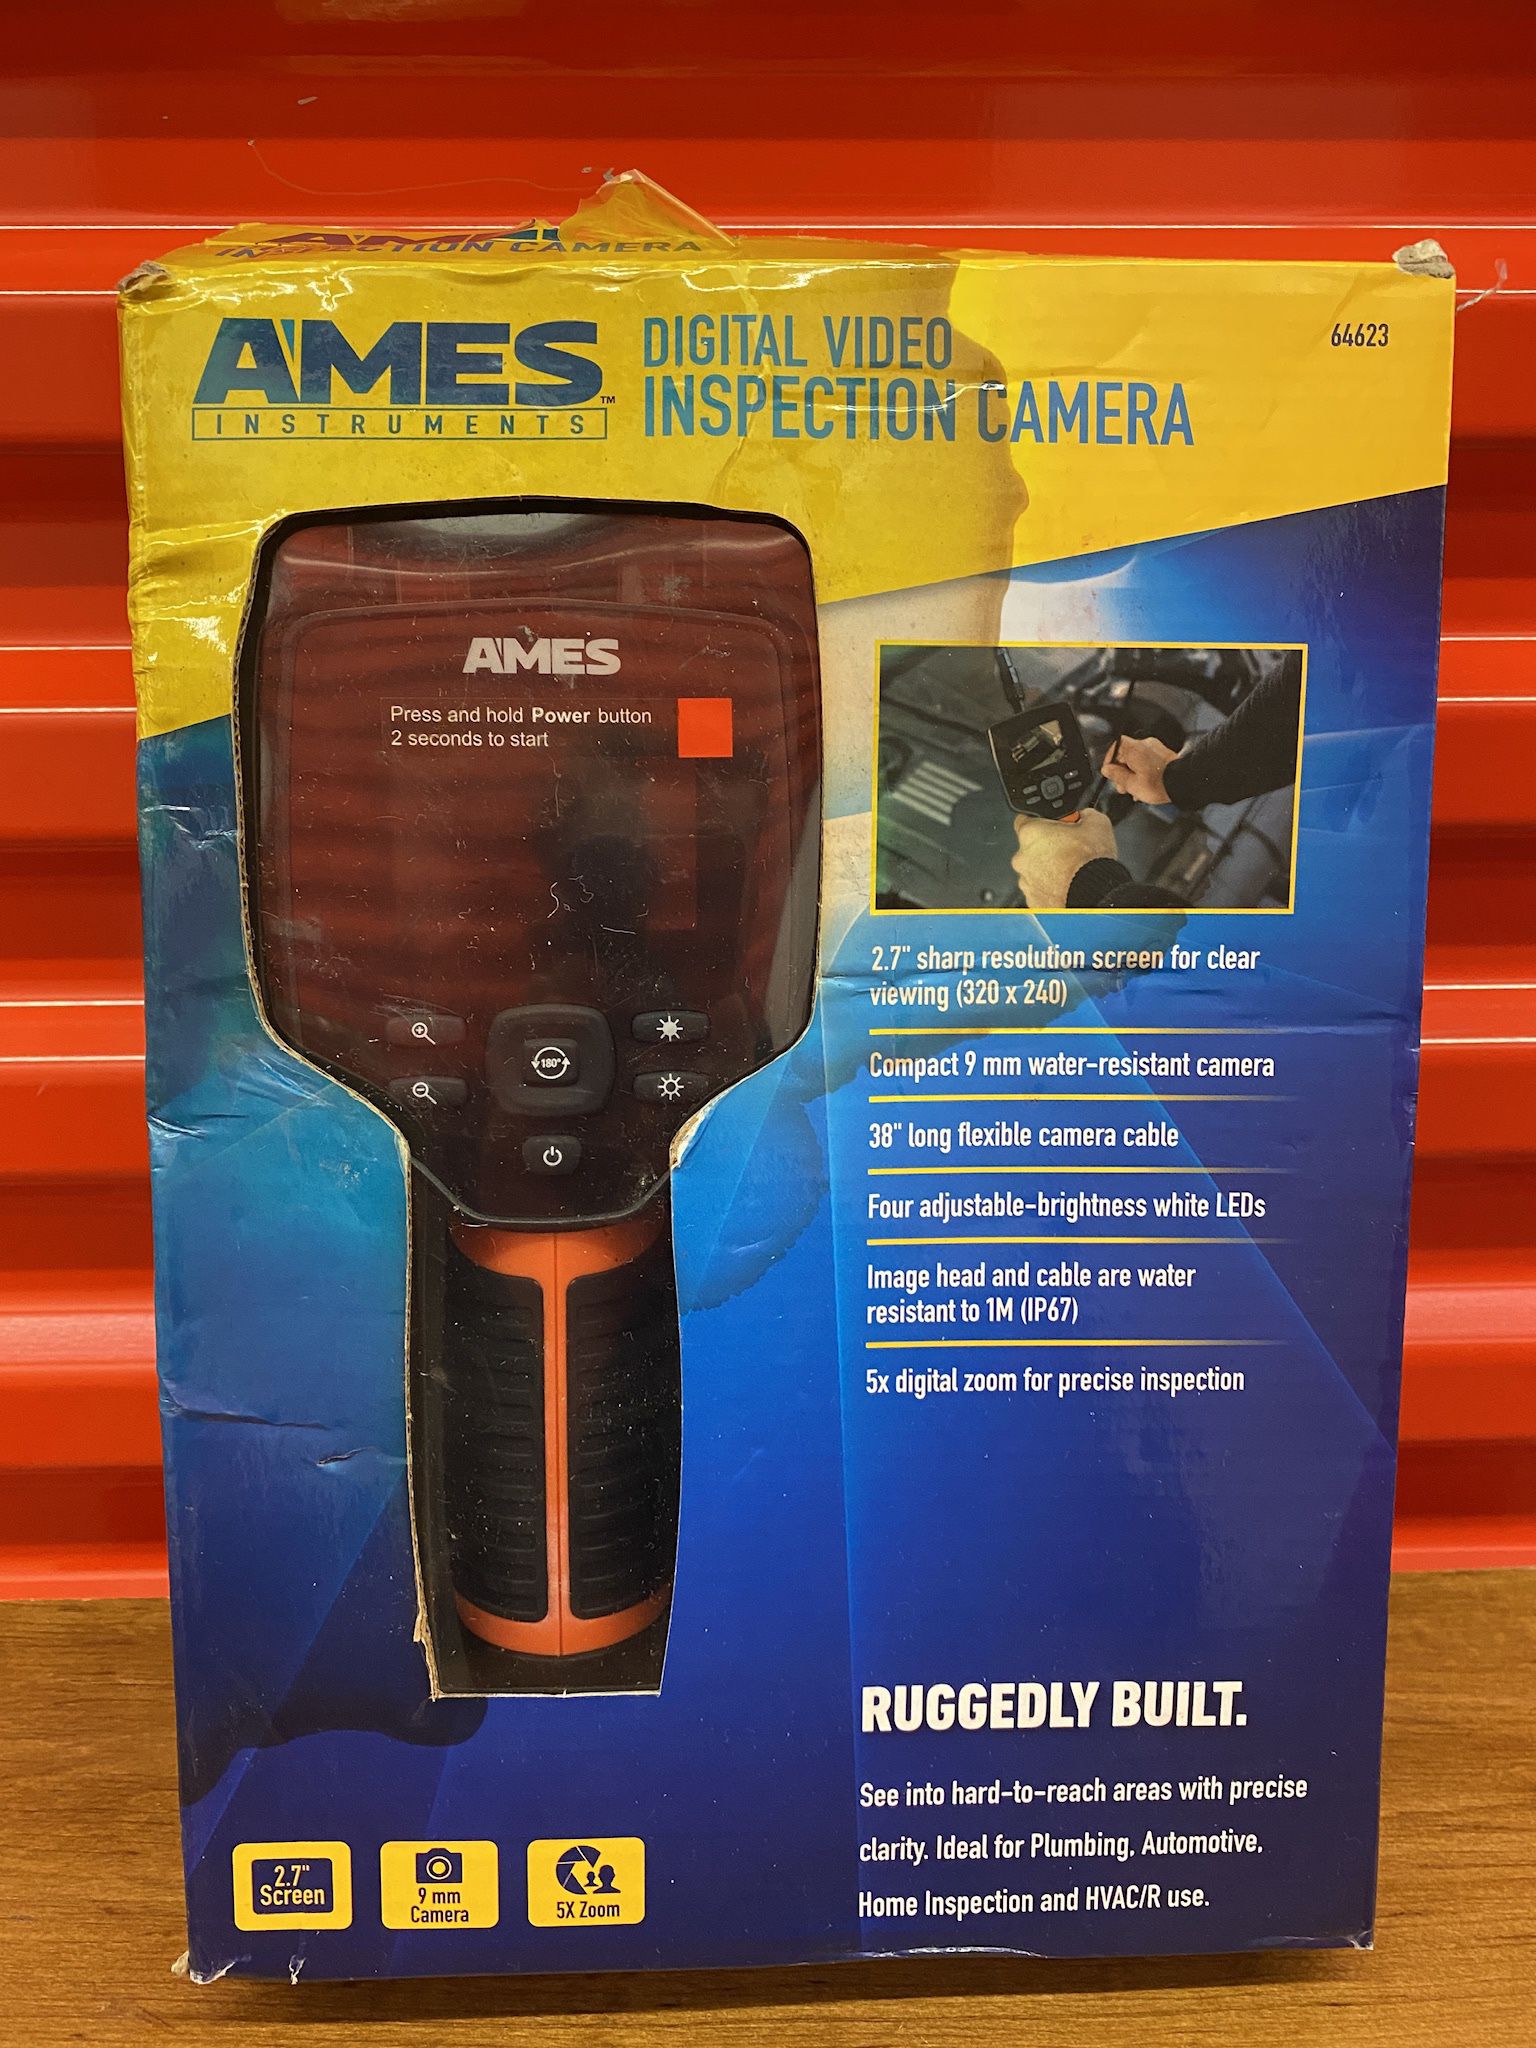 Ames Digital Video Inspection Camera For $85